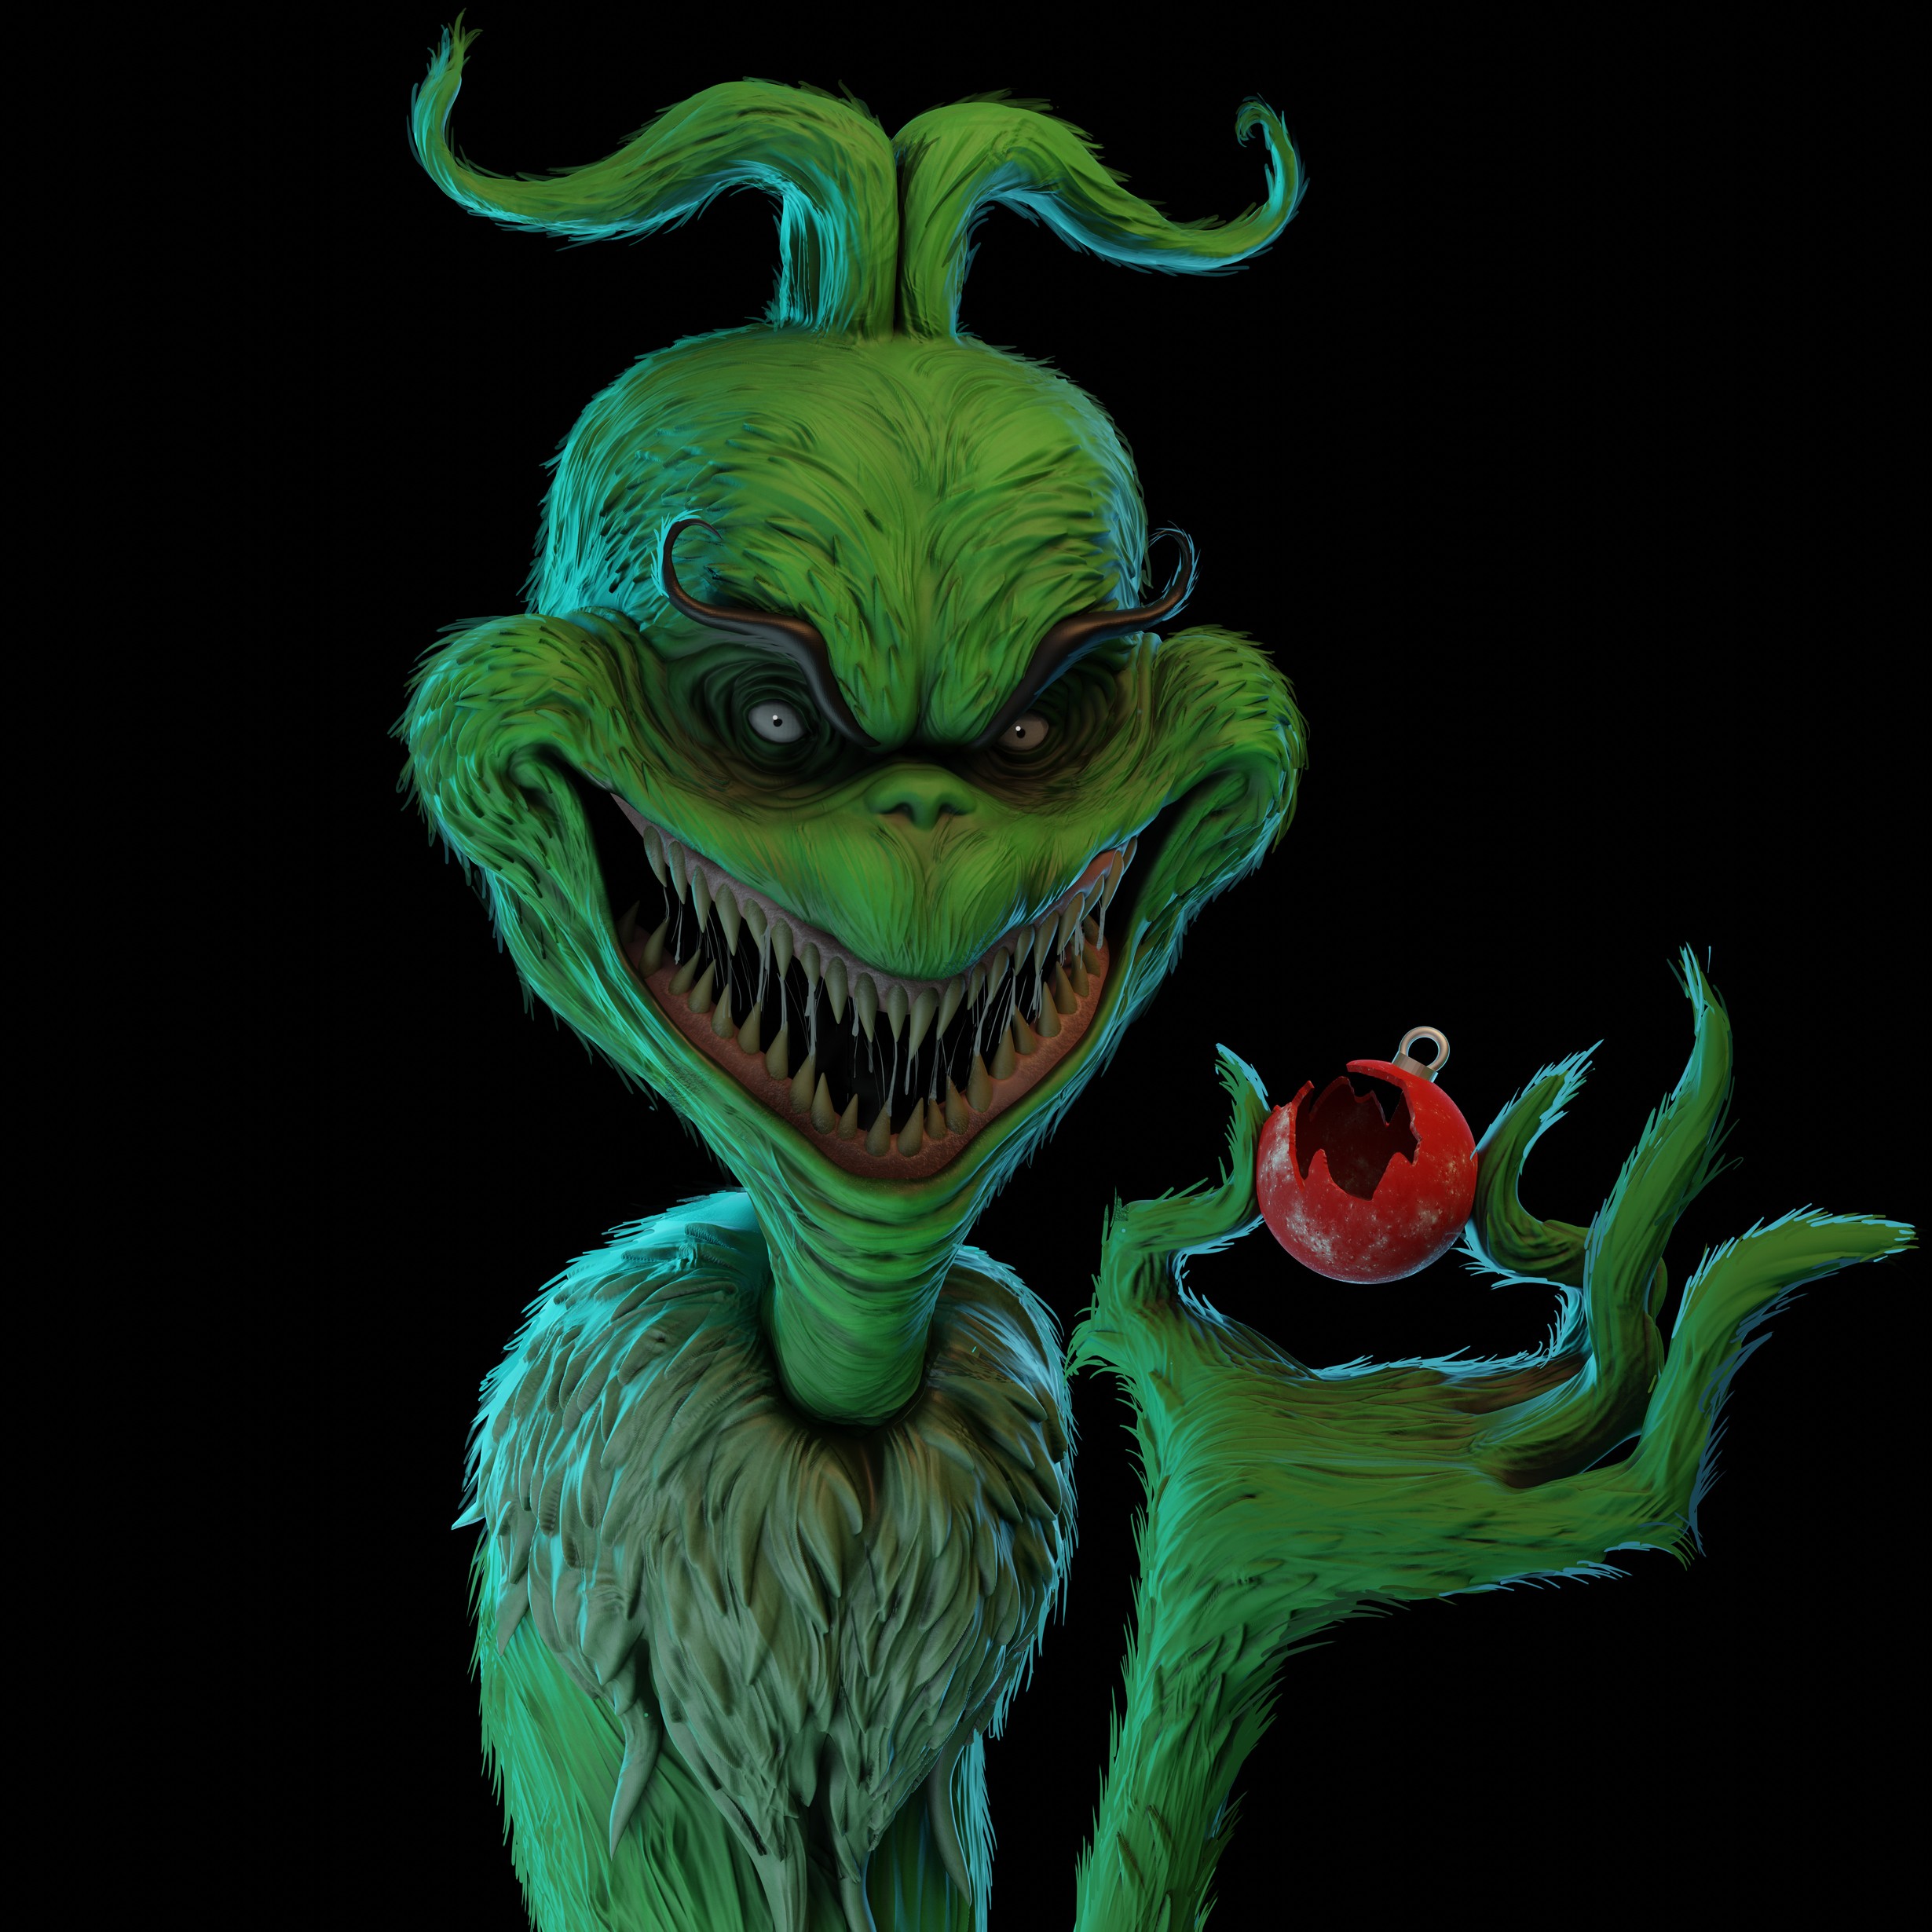 The Grinch Wallpaper 66 pictures